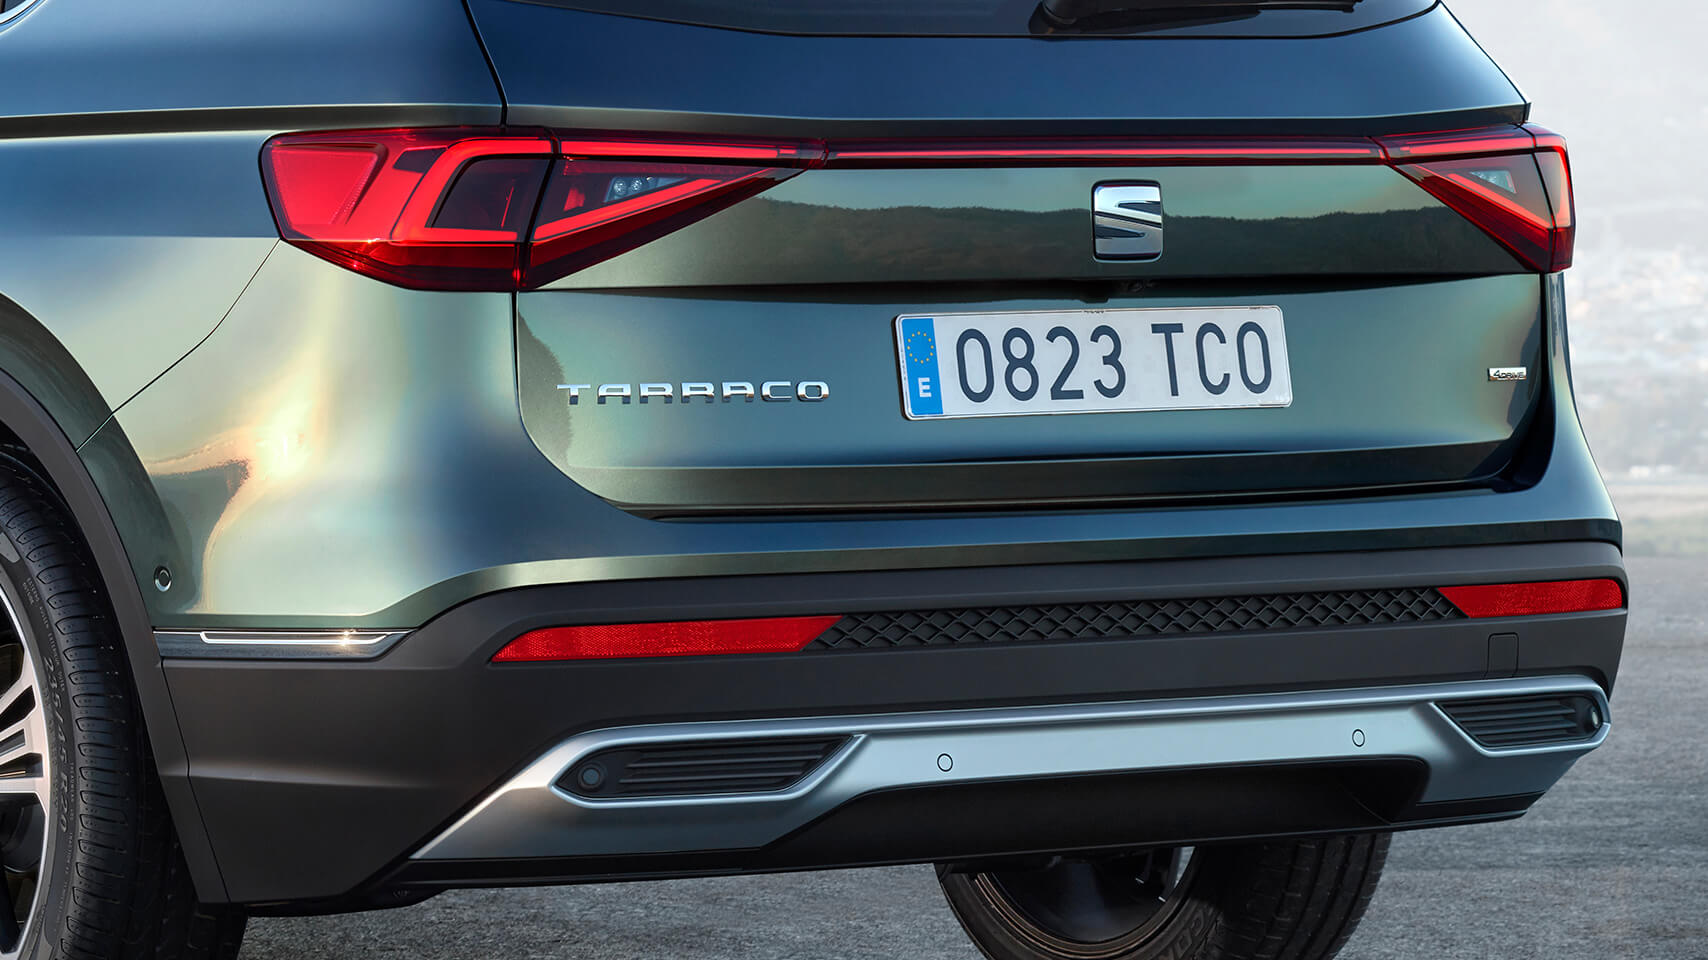 SEATʼs new flagship model the new SEAT Tarraco SUV back part